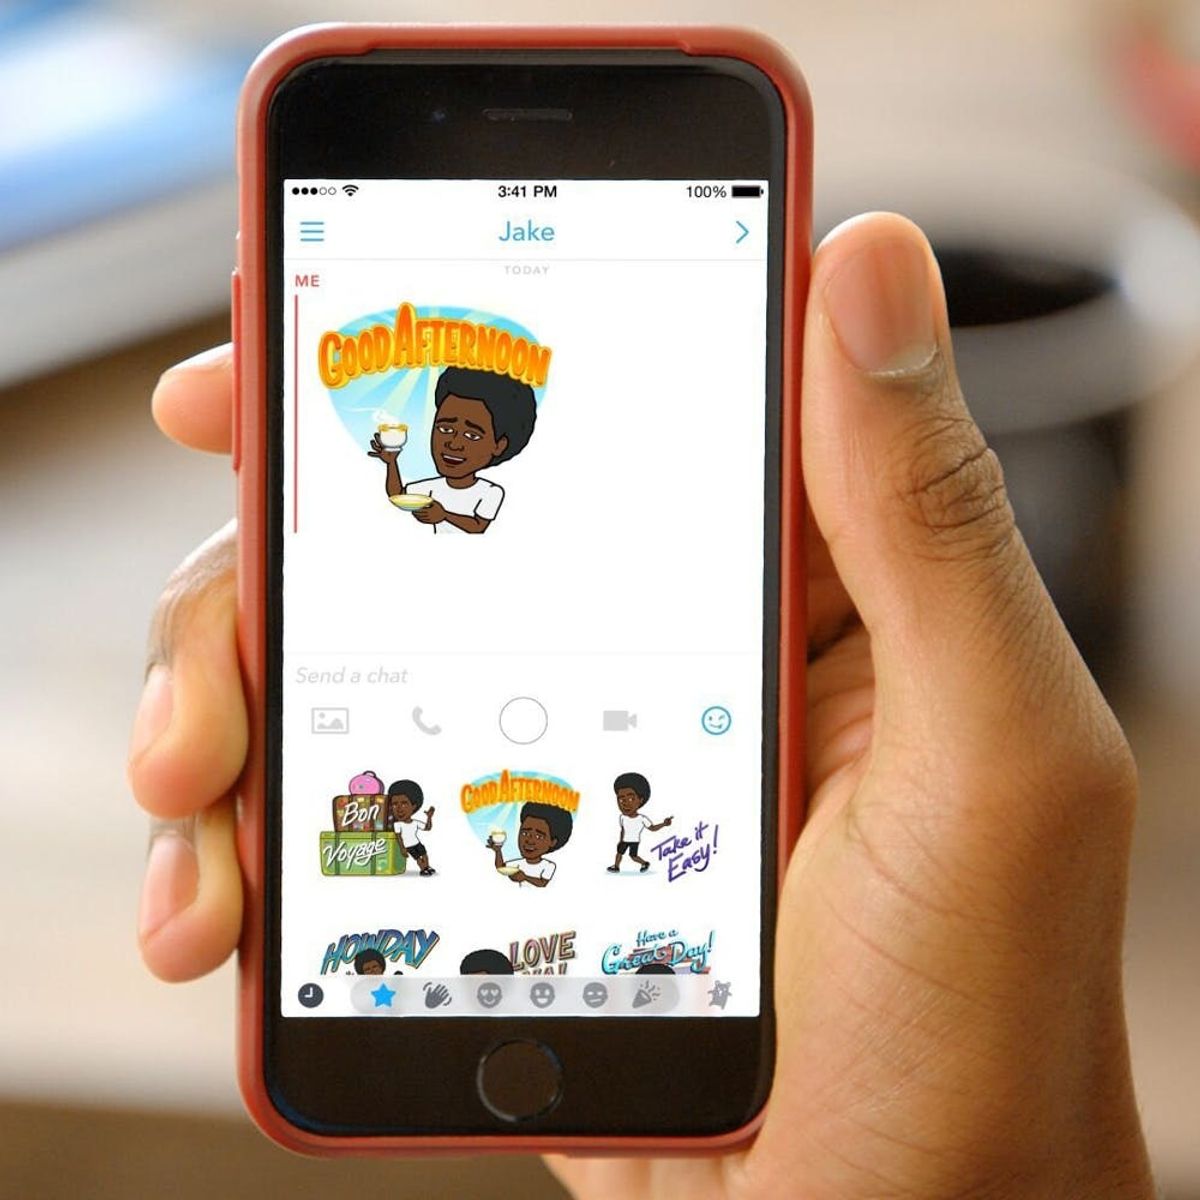 Snapchat Just Got 2 WILD Updates That Personalize the App for You